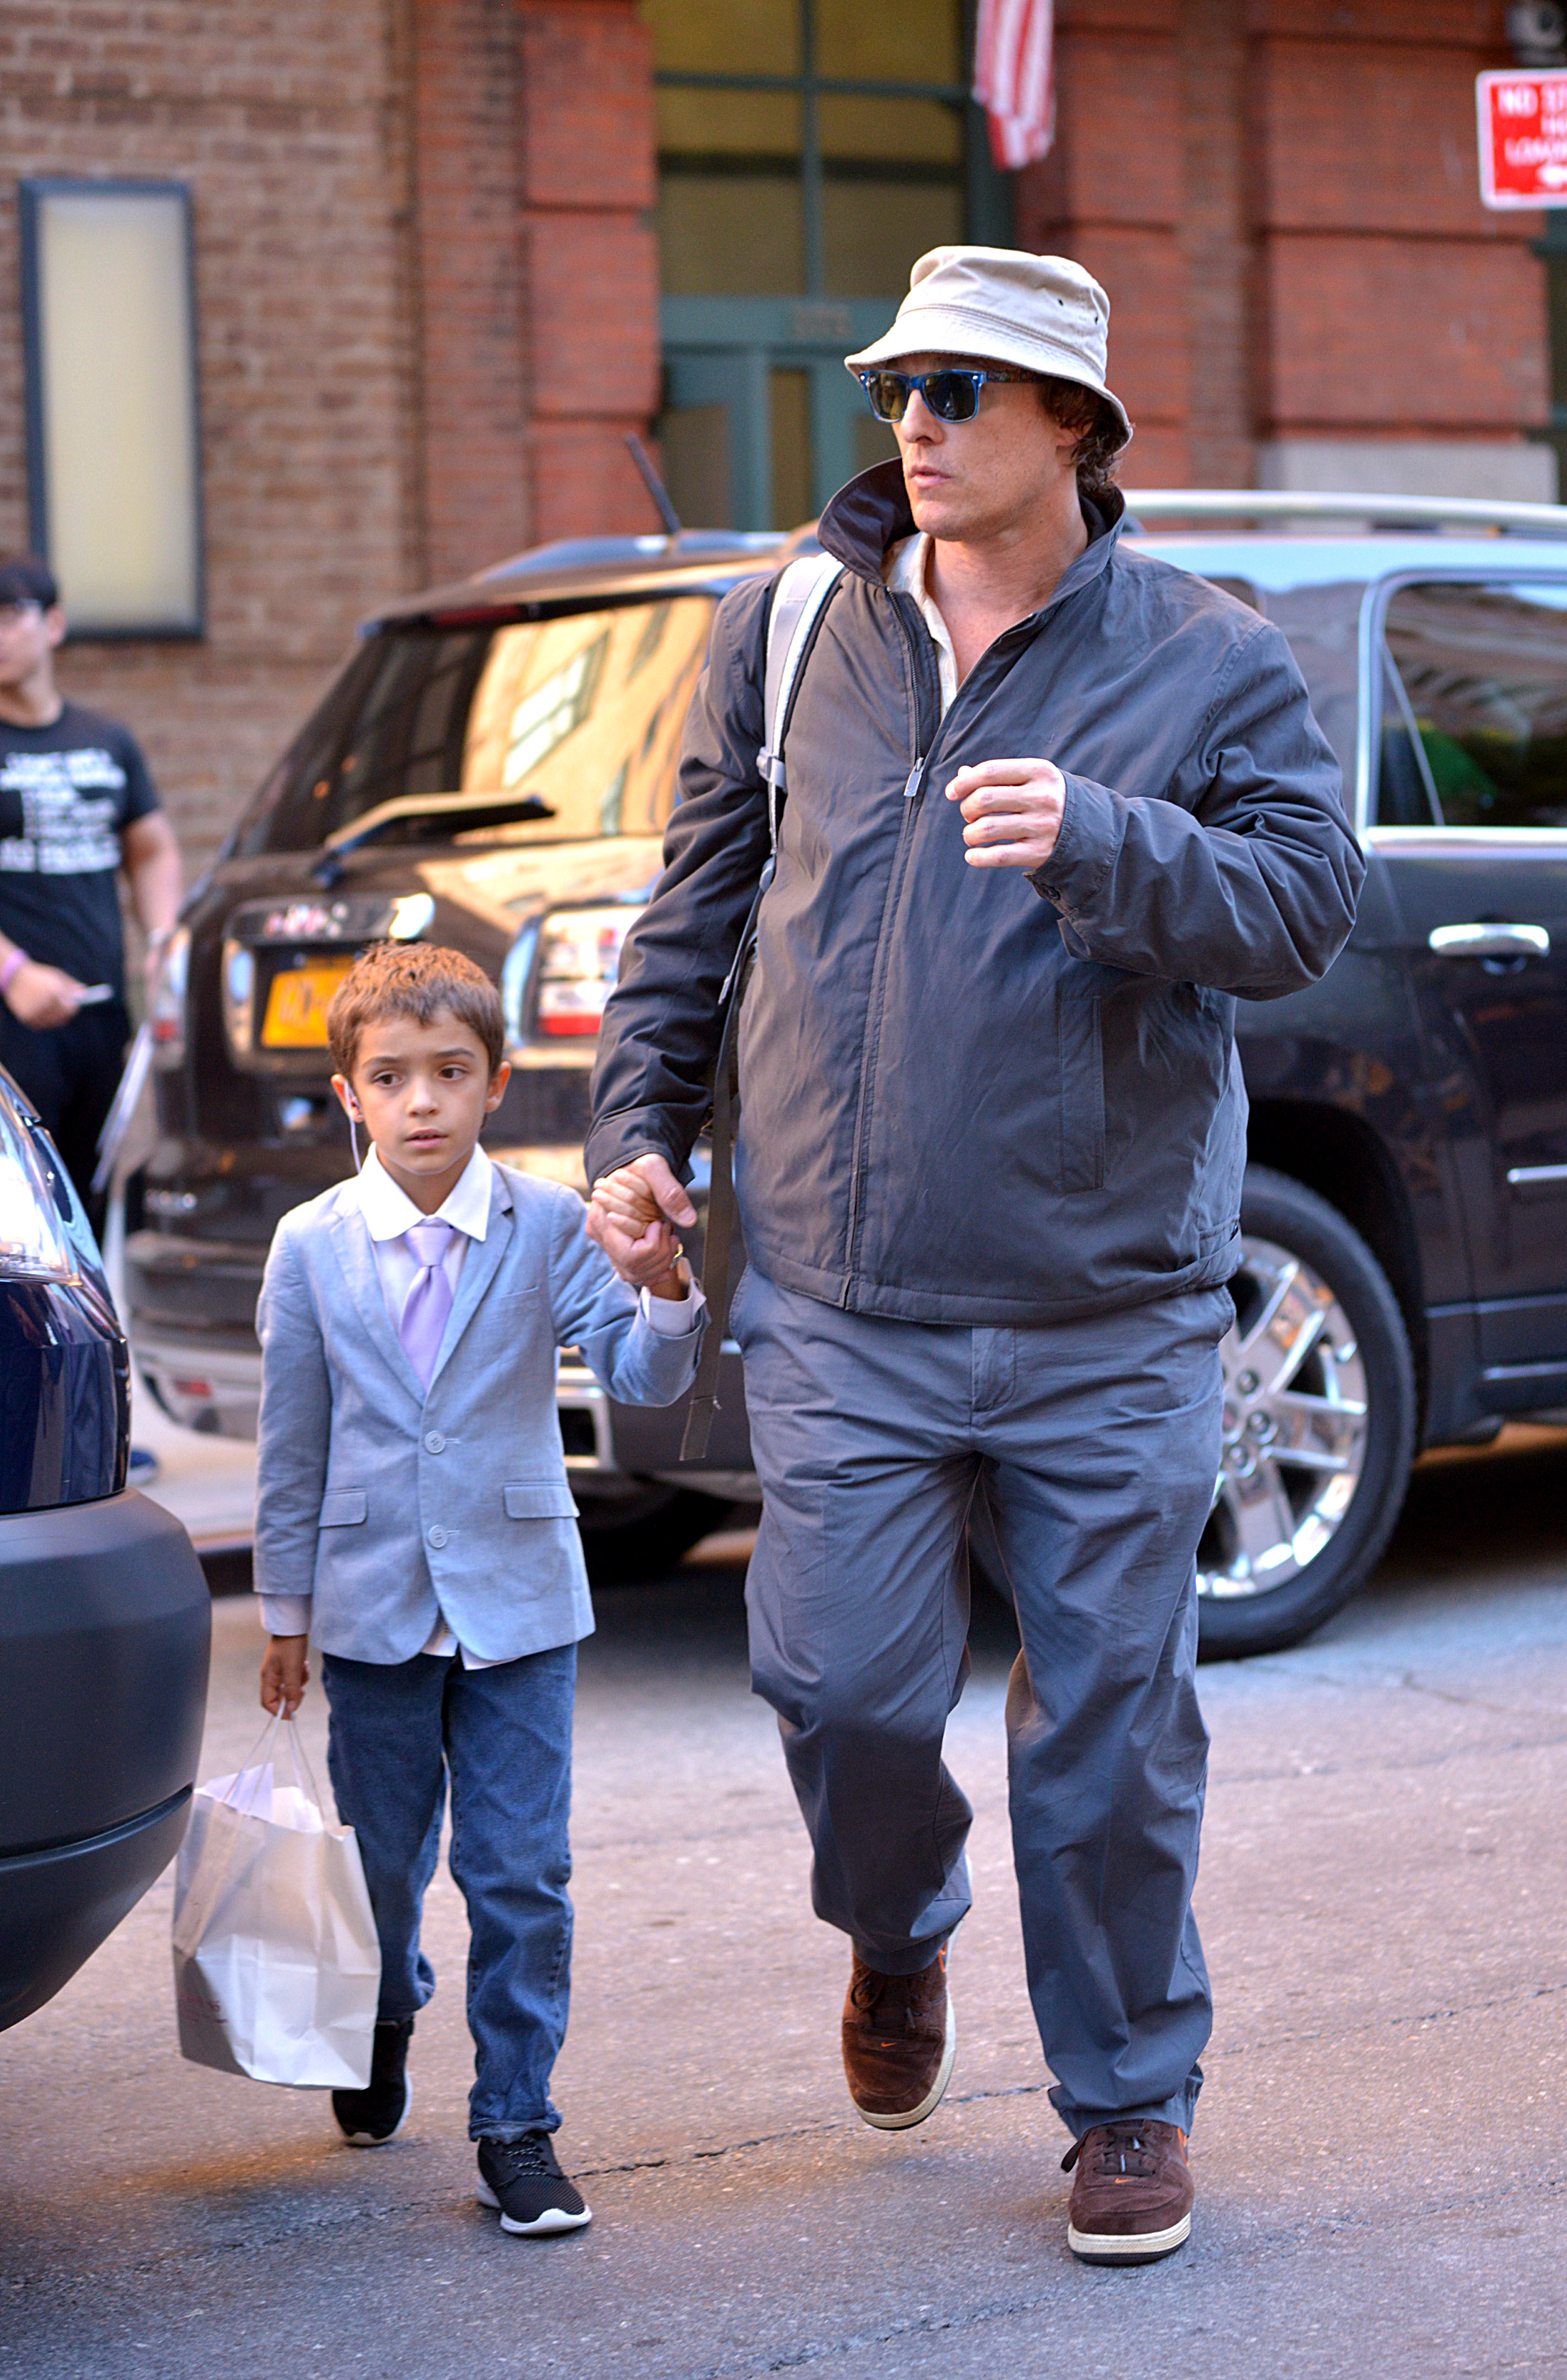 Here he is leaving a NYC hotel with his son. (Photo credit: Splash News)